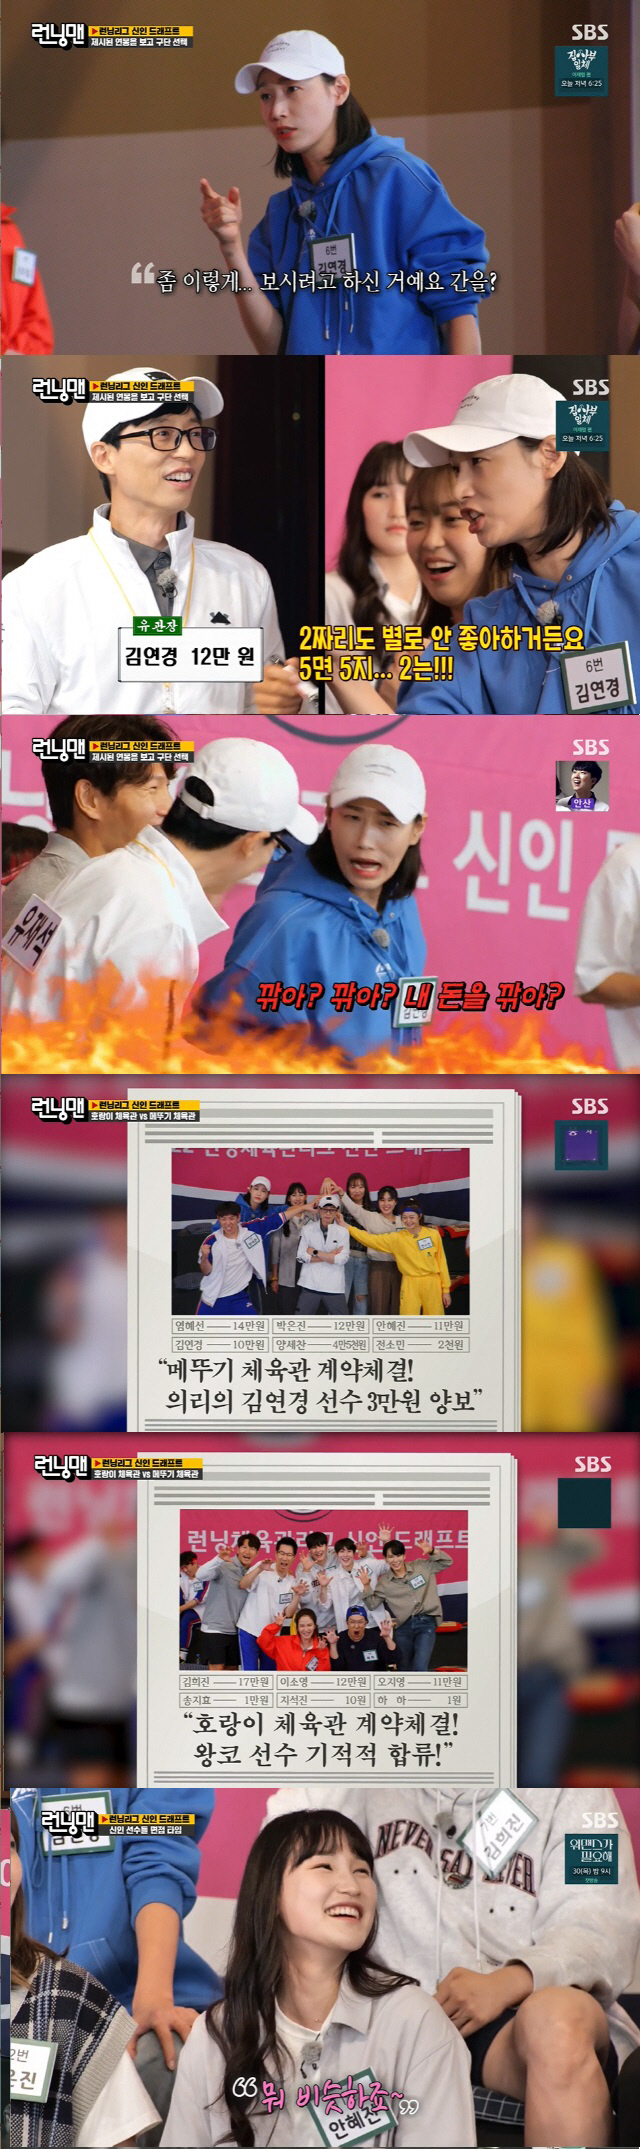 World class Kim Yeon-koung properly filled the vacancy of Kang-kang-soo Lee Kwang-sooOn SBS Running Man broadcasted on the 26th, Kim Yeon-koung, Kim Hee-jin, Oh Ji-young, Yeum Hye-Seon, Lee So Young, Ahn Hye-jin and Park Eun-jin appeared as guests of seven womens volleyball national teams who wrote four-legged myths in Tokyo Olympic Game.Running Man members who received a note saying Recruiting managers to recruit new players of the past.Yoo Jae-Suk and Kim Jong-kook became the respective managers and started the new draft of the running league.The first drafters to appear were Kim Yeon-koung and Kim Hee-jin.When the tall Kim Yeon-koung of 1m92 appeared, Haha cheered, calling it Gwangsuya; Kim Yeon-koung said, I often hear that.I will fill the vacancy of Lee Kwang-soo Following Kim Yeon-koung and Kim Hee-jin, Oh Ji-young Yeum Hye-Seon Park Eun-jin Lee So-young Ahn Hye-jin appeared.Kim Jong-kook, who welcomed the appearance of the athletes exceptionally, was delighted and excited to see all the players appear.Kim Jong-kook has always been like a tiger, but he has not been able to go, and Kim Yeon-koung has been cute and cute.Also, when the story about the band came out, Kim Yeon-koung said, I dont know.Yoo Jae-Suk then fired a stone fastball saying, If you do not know that you are a big boy, it is a big boy. Younger Ahn Hye-jin said, I think I want to hit you with a blanket once rather than like a blanket.A full-scale travel time has begun.The individual skill game to appeal to the managers who decided to see the players skills started, Yoo Jae-Suk started the Salary negotiations with 1.3 million One and Kim Jong-kook with 990,000 One.Kim Yeon-koung, in particular, strongly appealed to the managers to raise Salary.Kim Jong-kook said to Kim Yeon-koung, I have a skill, but it is a little uncomfortable.Kim Yeon-koung joined the Yoo Jae-Suk team, saying, I want to come with the 30,000 One to Yang Se-chan.Park Eun-jin, Ahn Hye-jin and Yeum Hye-Seon also joined the Yoo Jae-Suk team and Kim Hee-jin Oh Ji-young joined the Kim Jong-kook team.The two teams were Game and the manager was awarded a prize according to each round win or loss. The first Battle was Battle, and the option was not to write honorifics.One point was deducted when you used the honorific phrase.Throughout Game, Kim Yeon-koung acted as the great king of the Kanjok to provoke Kim Jong-kook and fill Lee Kwang-soos vacancy.After a fierce game with a lot of mistakes and honorific words, the Kim Jong-kook team won the decisive mistake of Yoo Jae-Suk.Kim Yeon-koung lashed out at such a Yoo Jae-Suk and laughed.